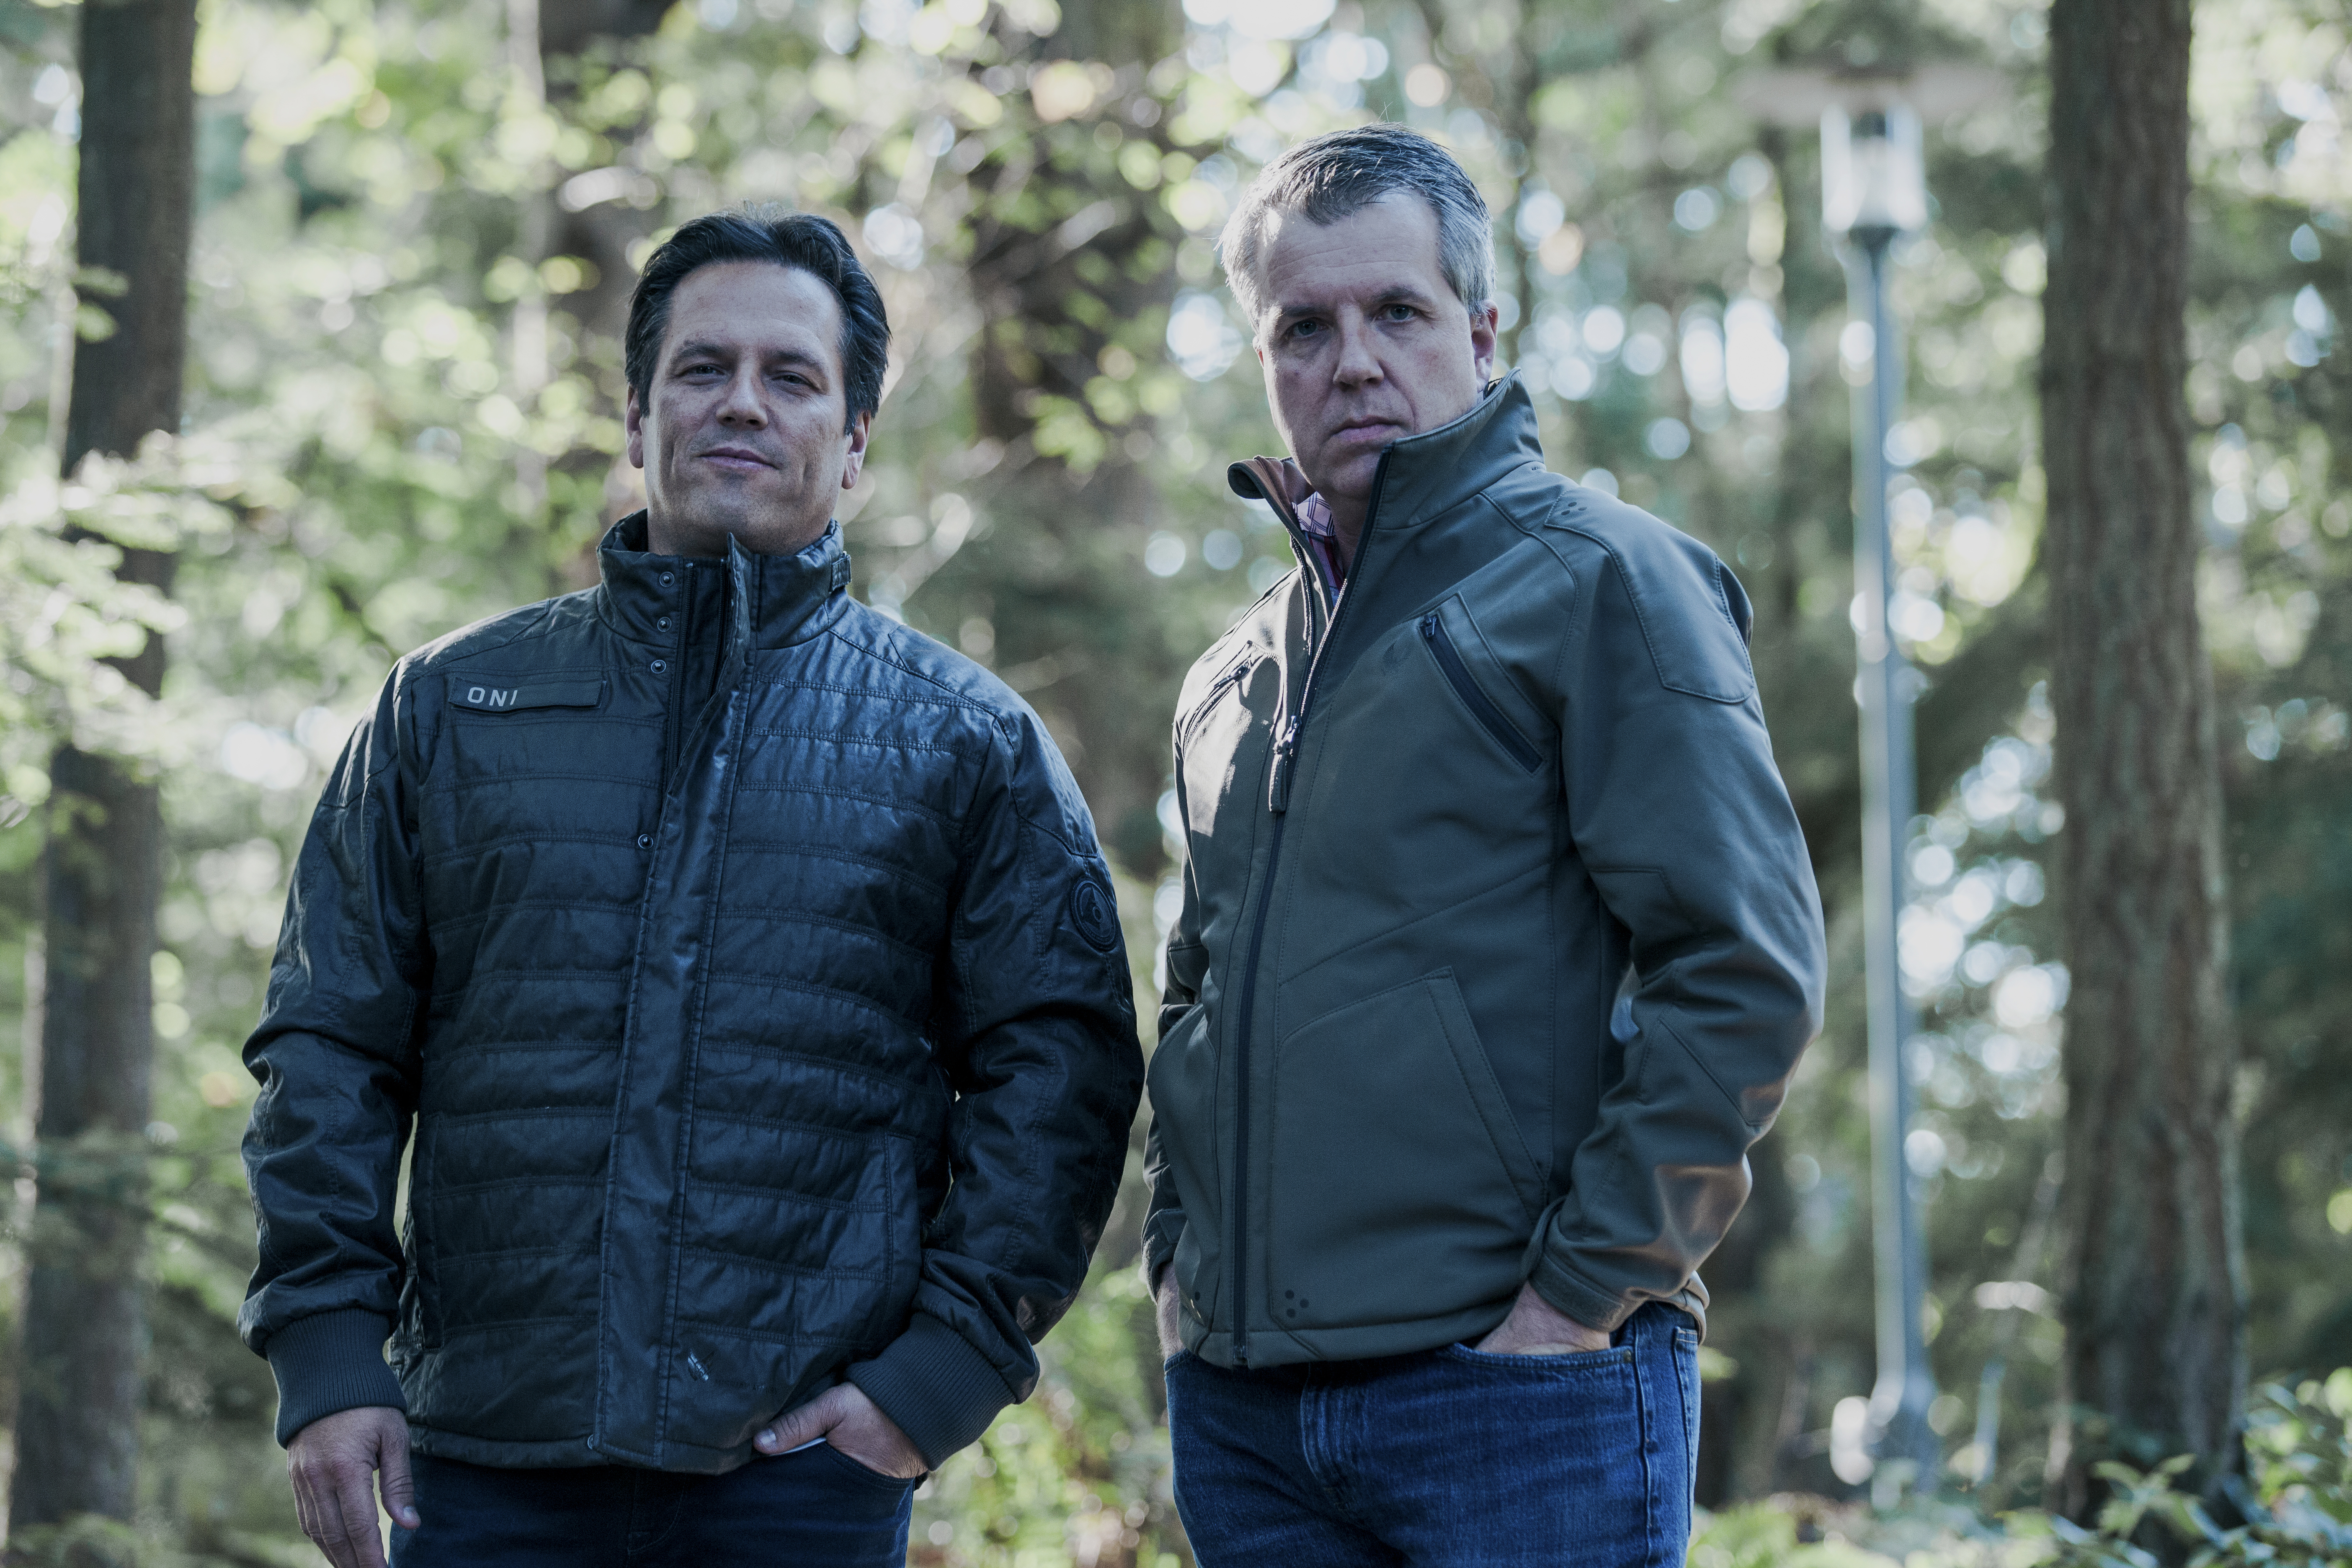 Phil Spencer and Major Nelson in Musterbrand